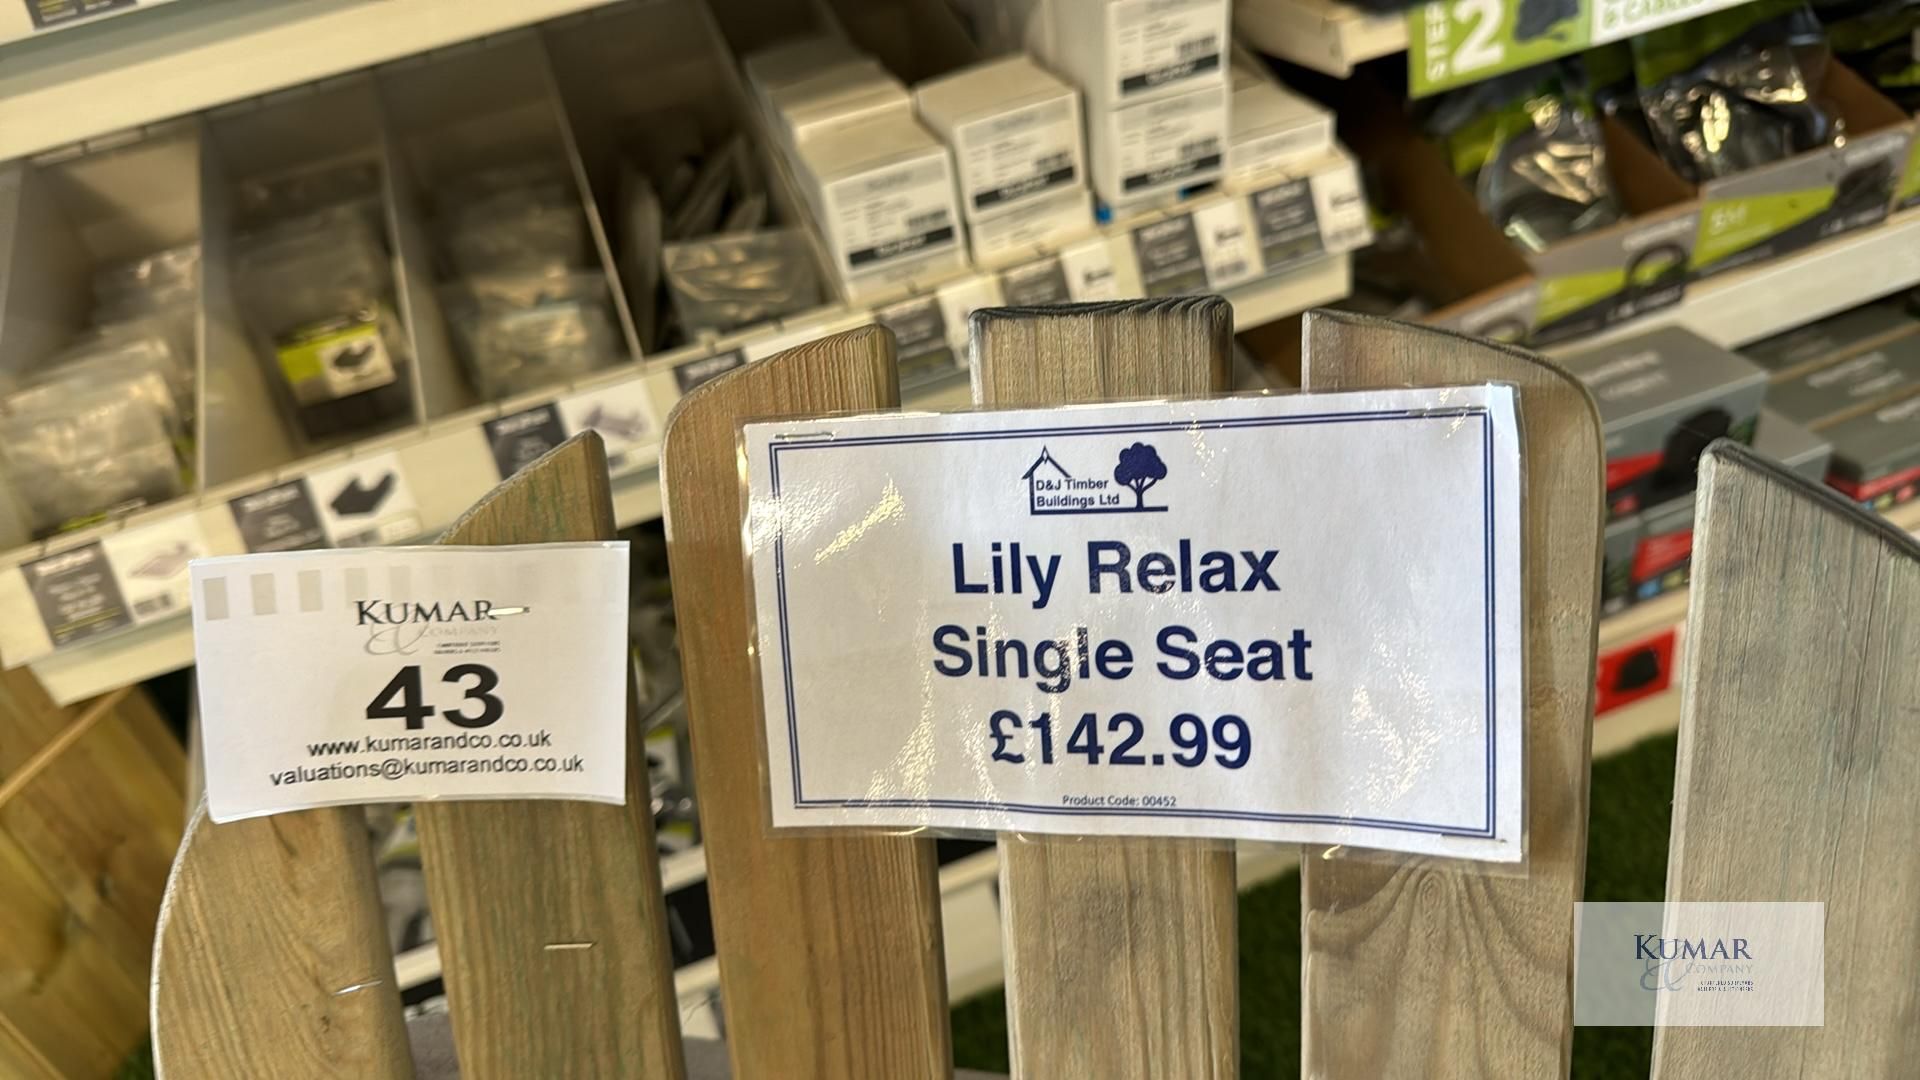 Lily Relax Single Seat, RRP £142.99 - Image 5 of 6